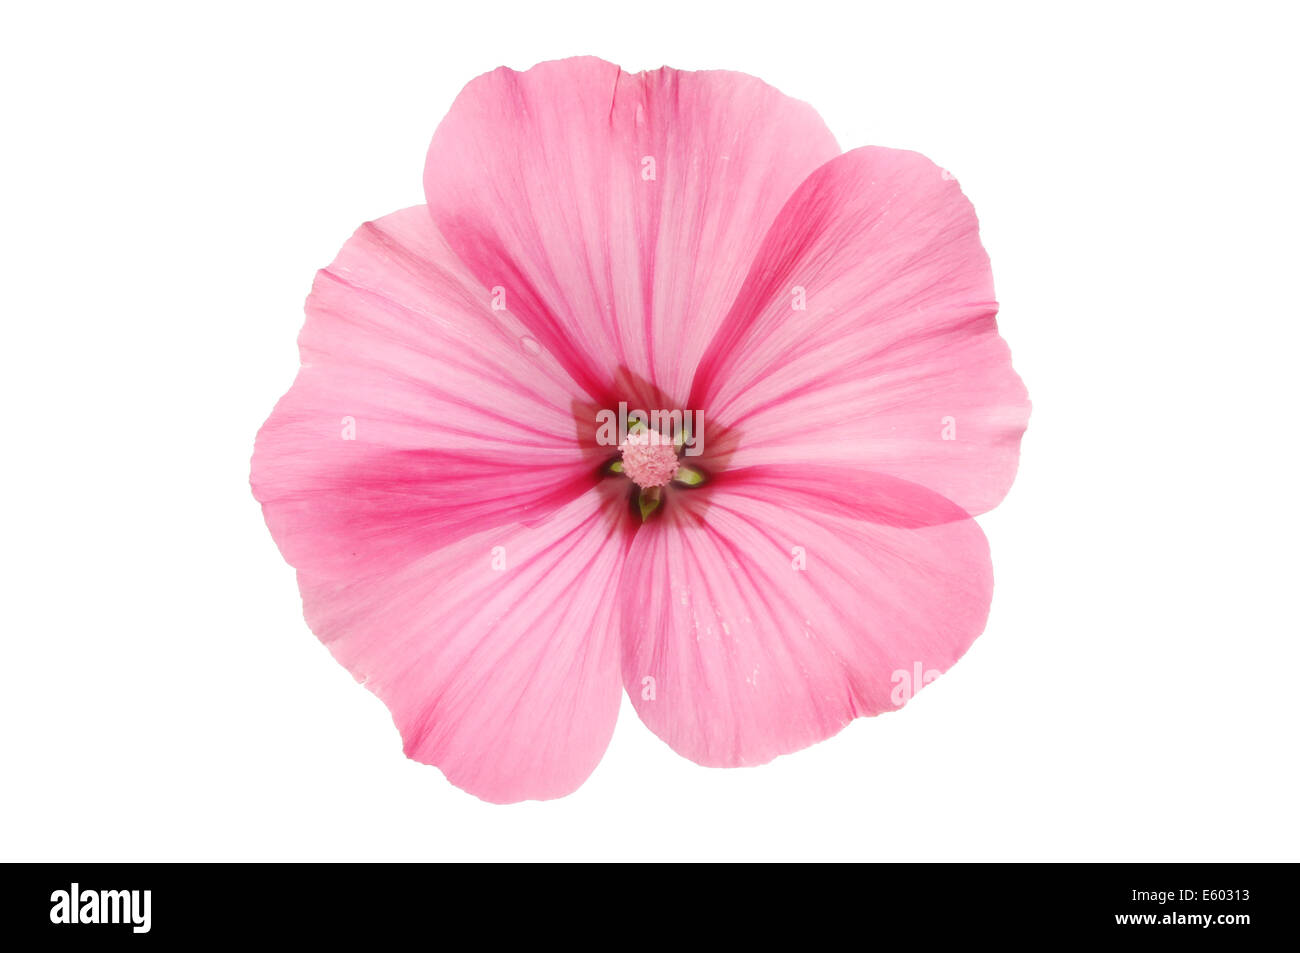 Single pink lavatera flower isolated against white Stock Photo